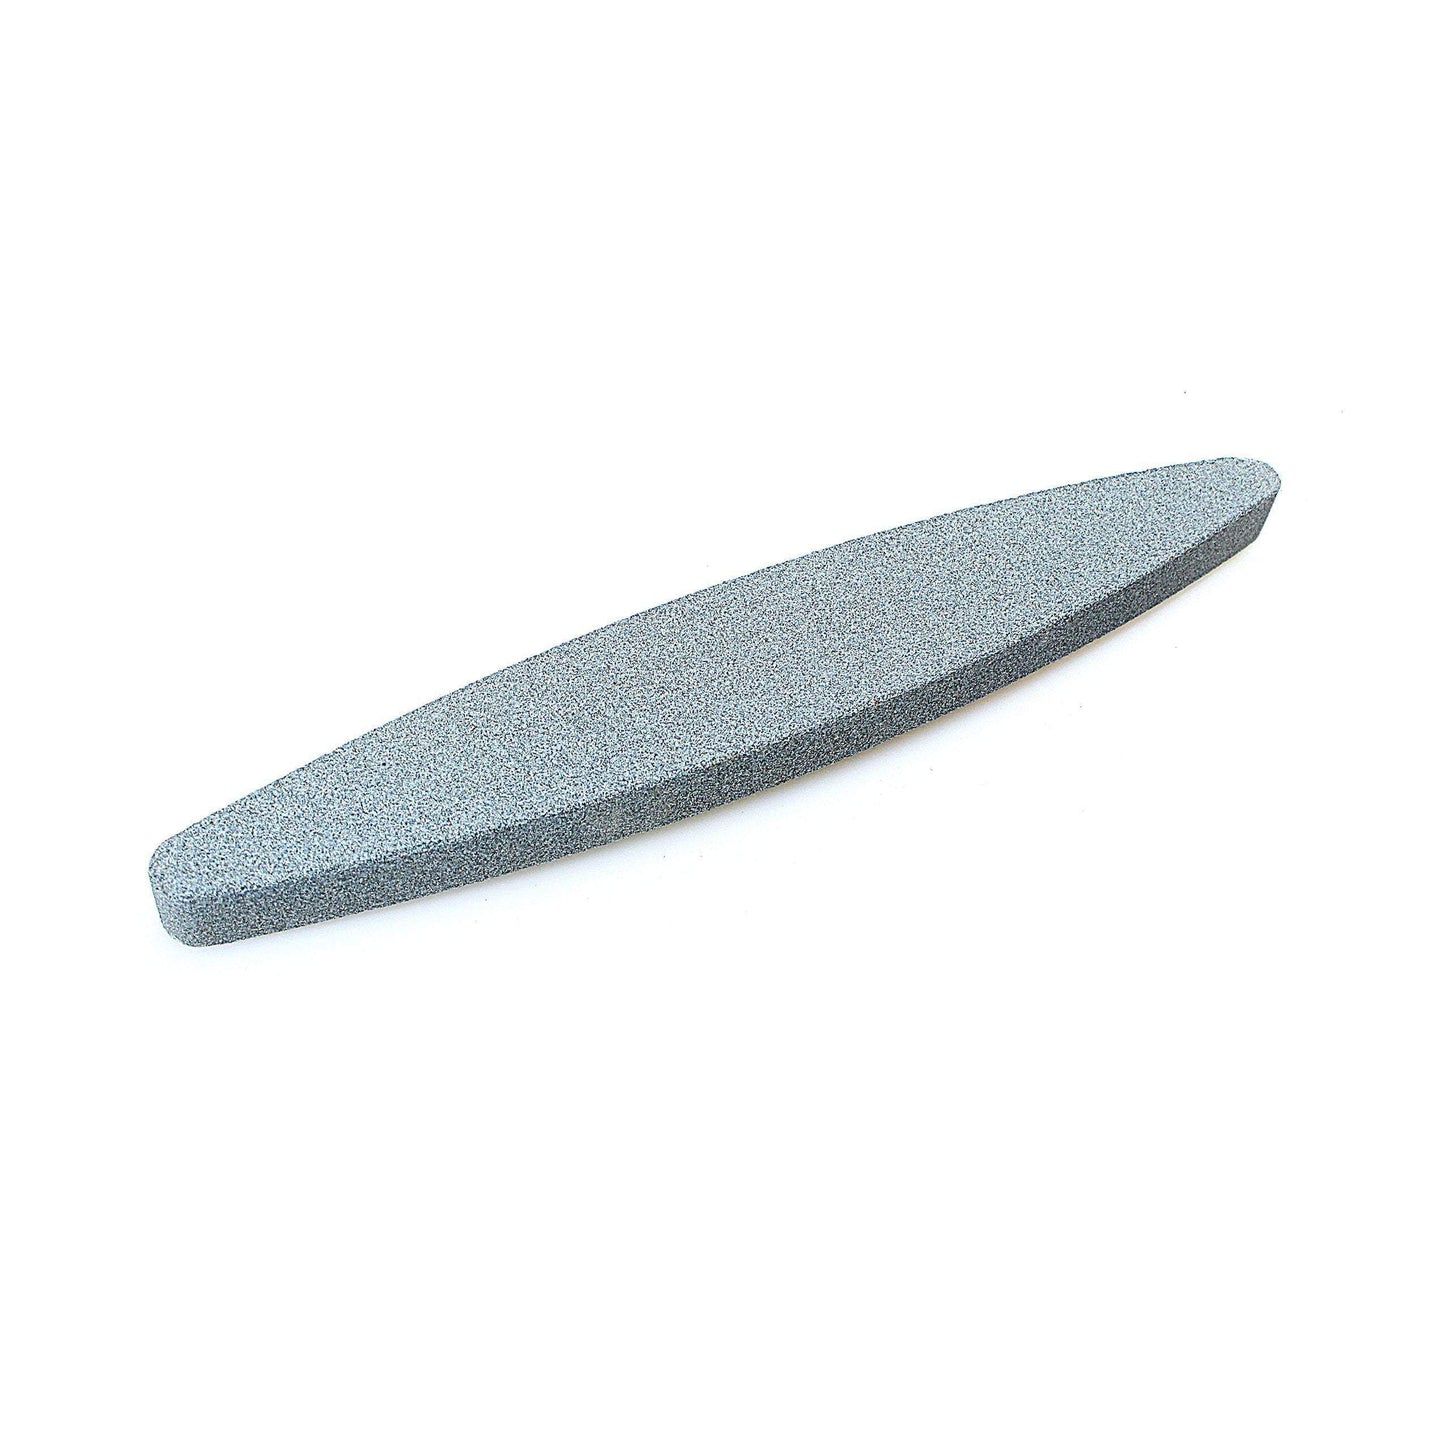 Oval Knife Sharpener Double Sided Whetstone 3866 (Large Letter Rate)